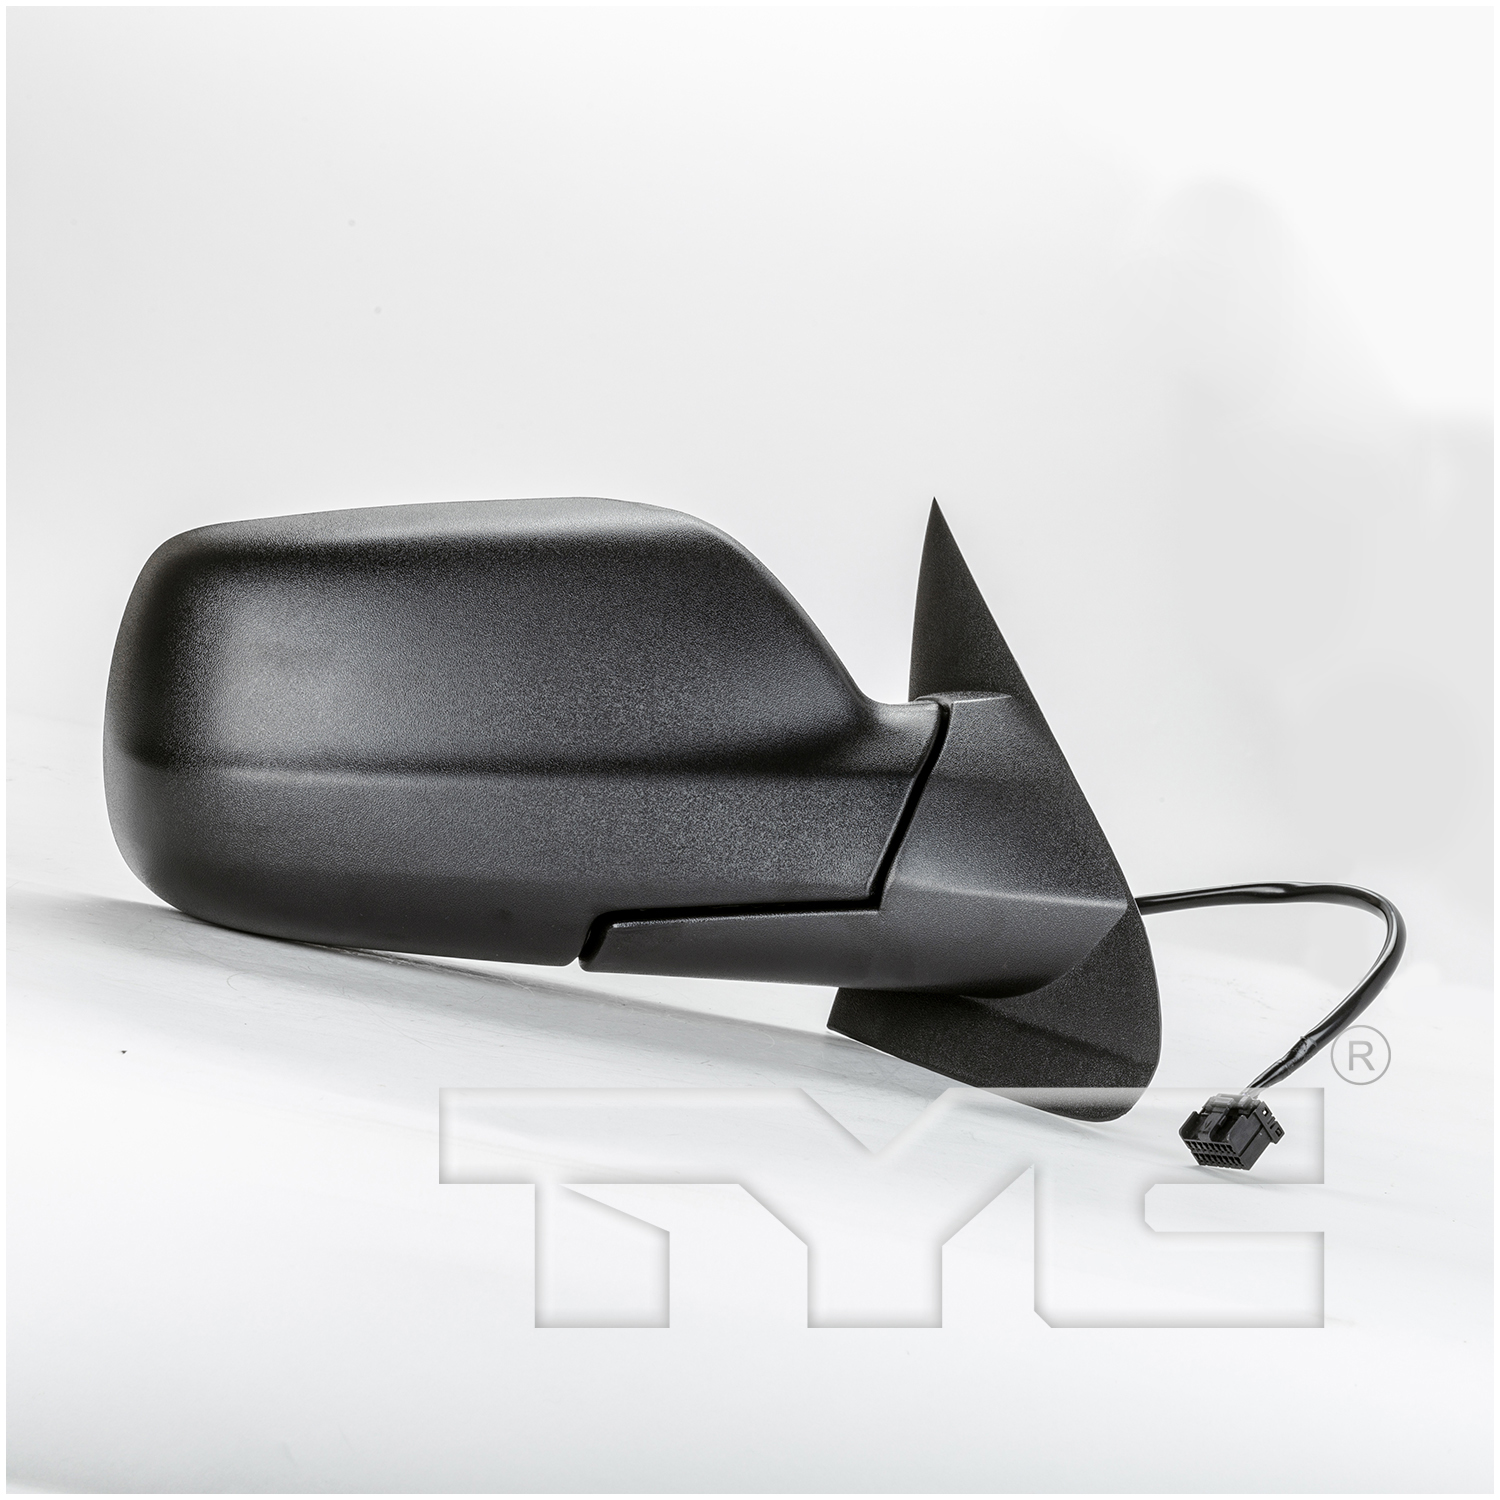 Aftermarket MIRRORS for JEEP - GRAND CHEROKEE, GRAND CHEROKEE,05-10,RT Mirror outside rear view